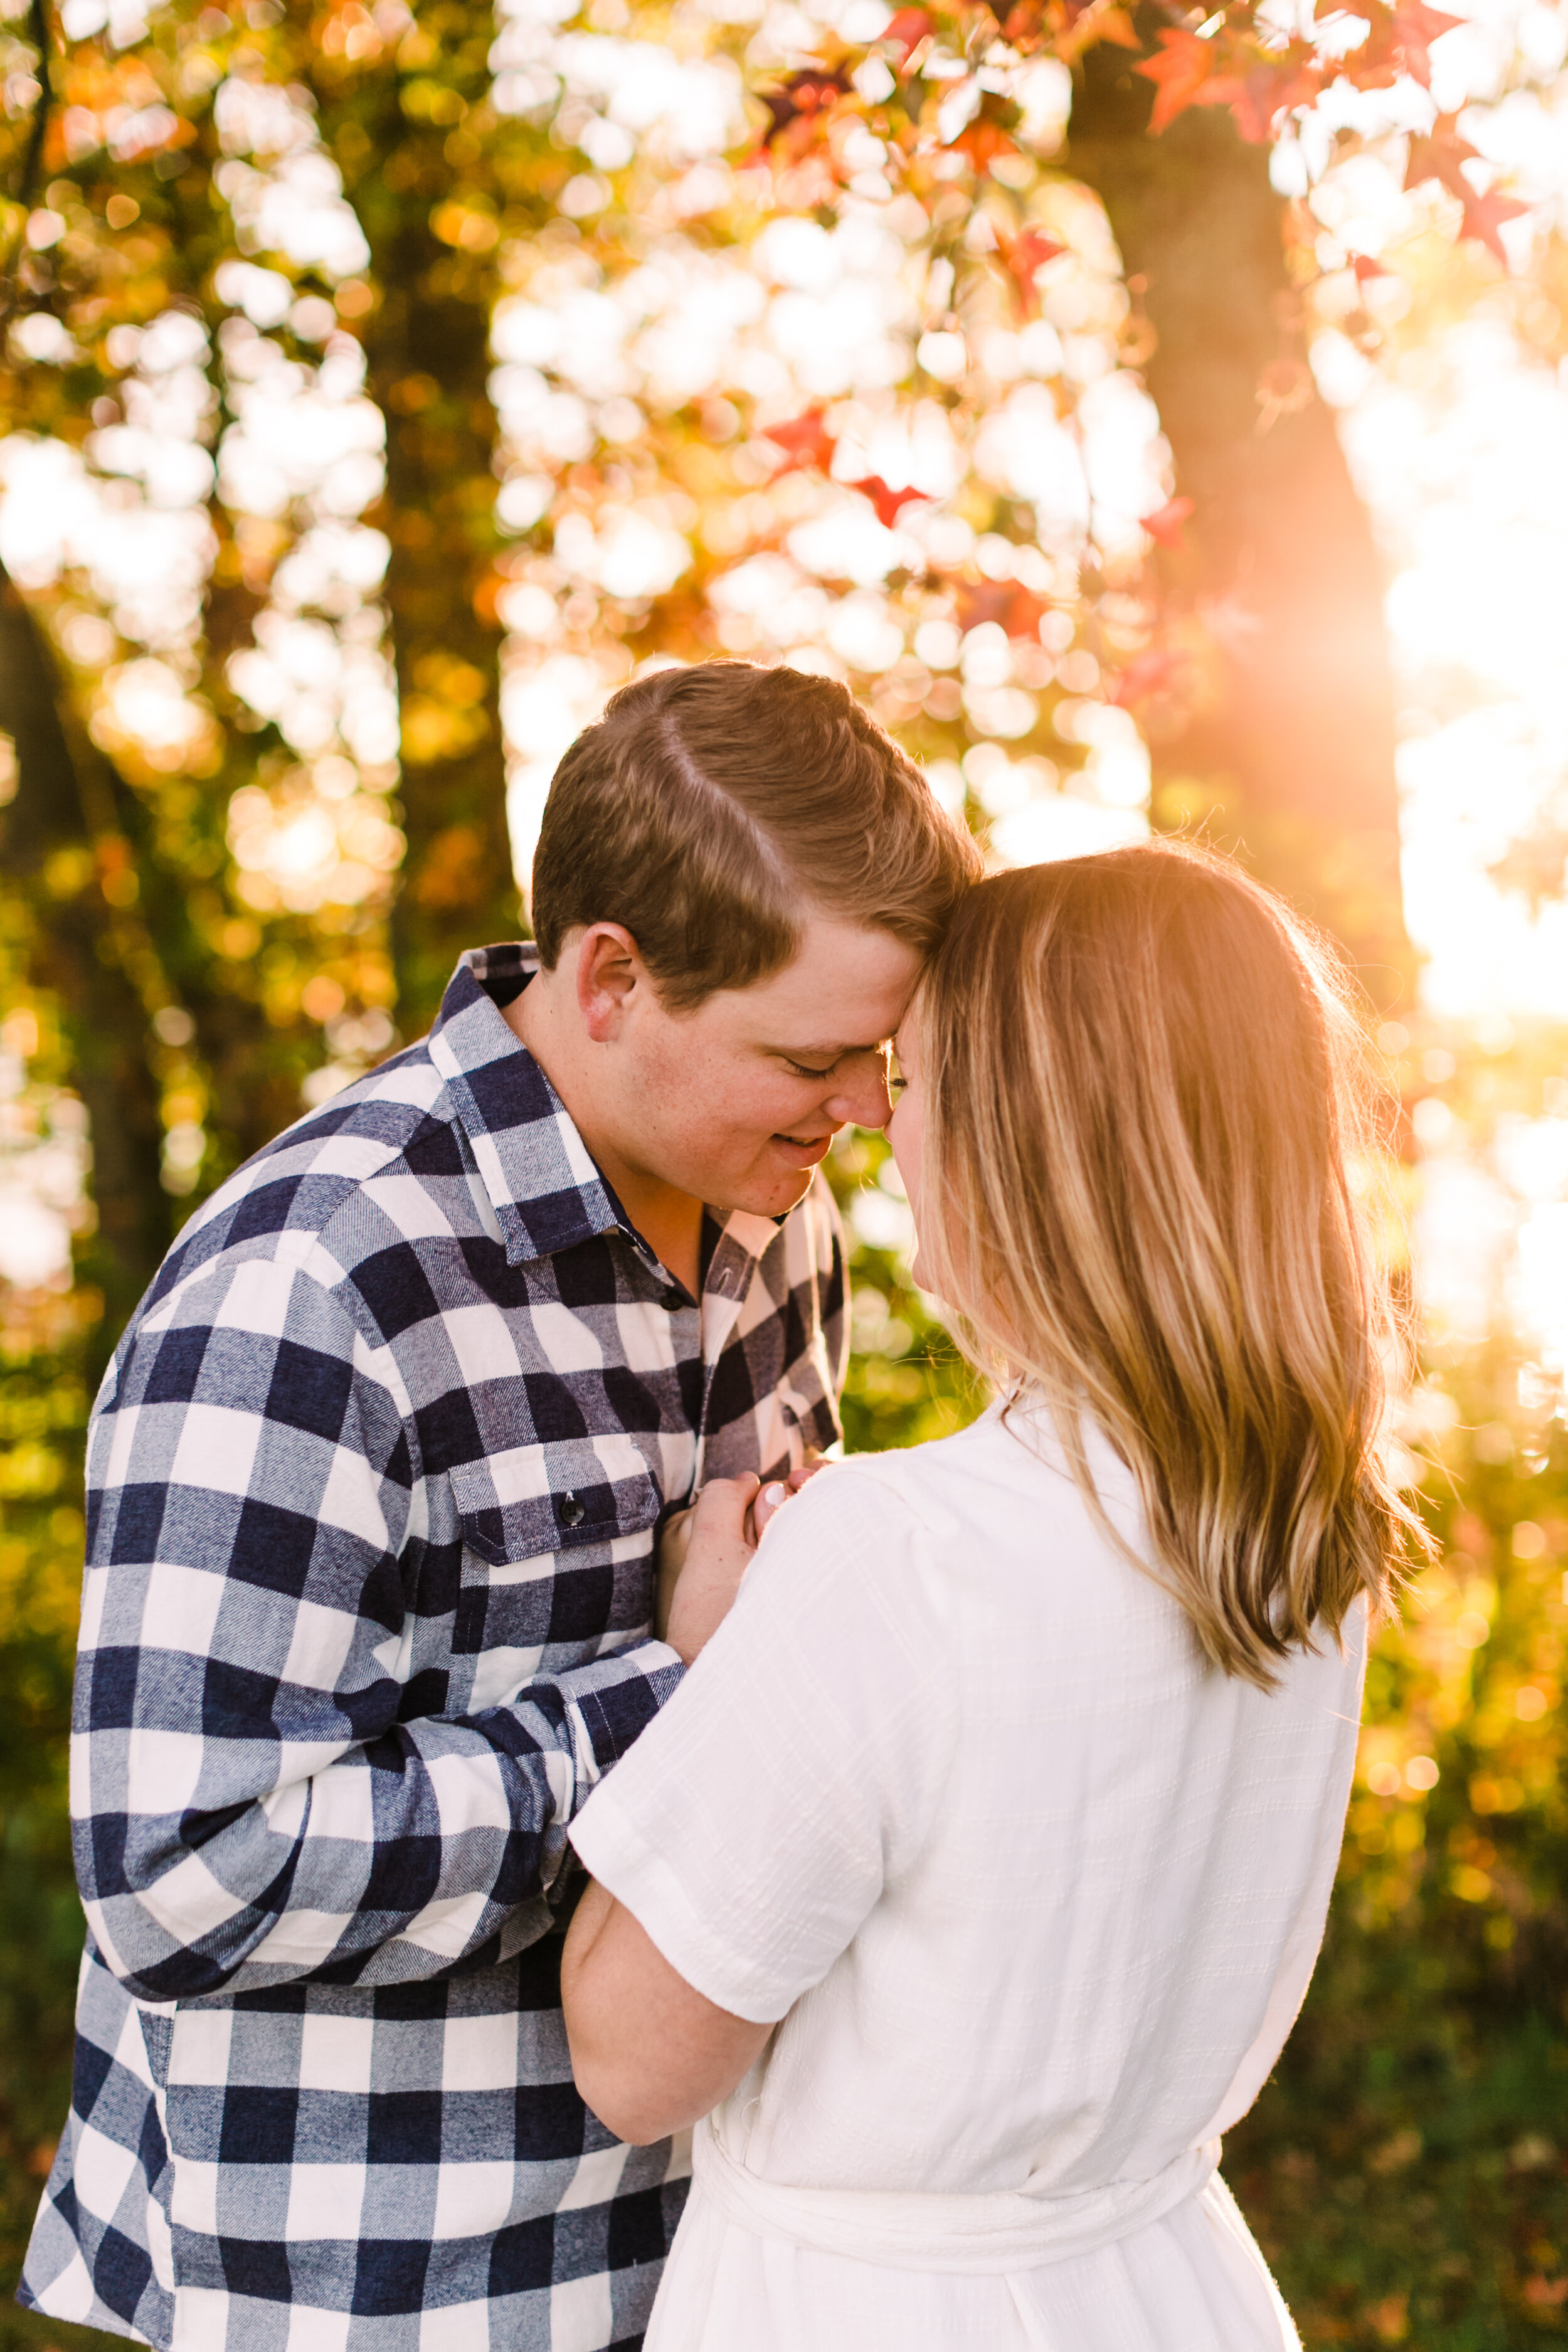 Tennessee+Fall+Engagement+Photos+Puppy (45 of 63).jpg